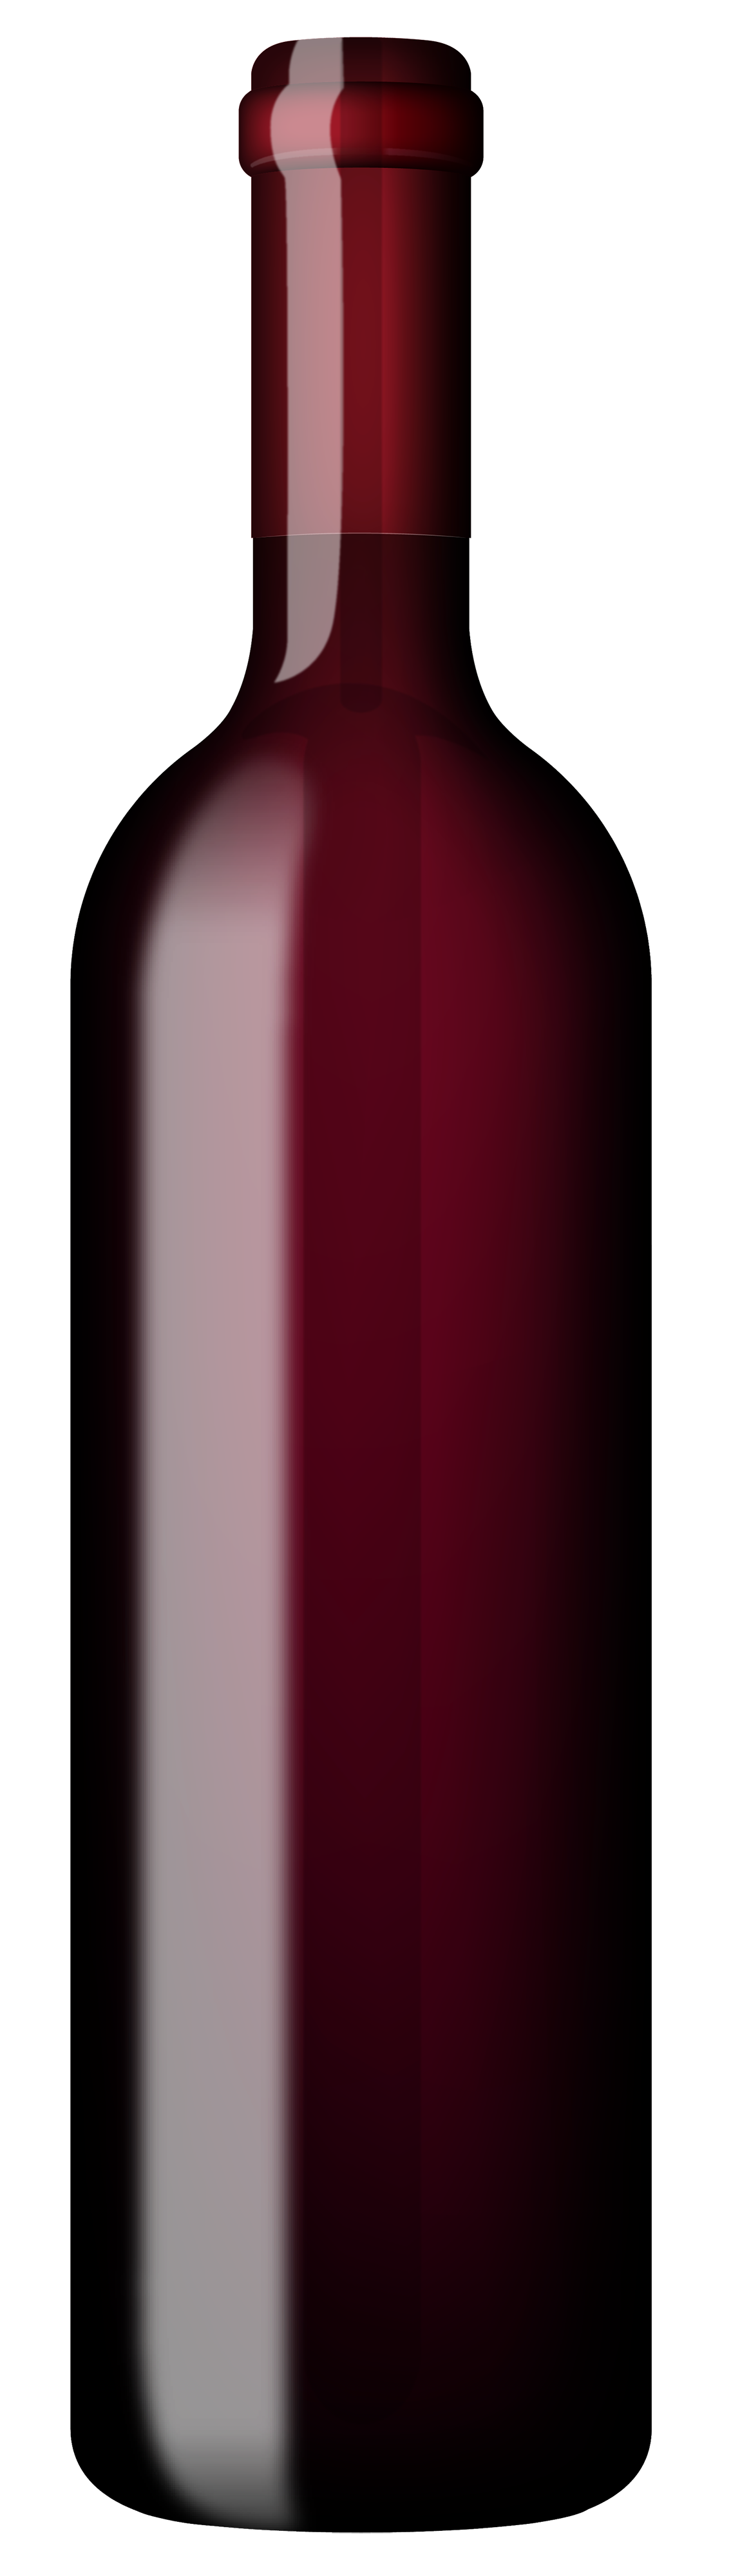 Wine bottle red bottle of wine clipart the clipart image #19748